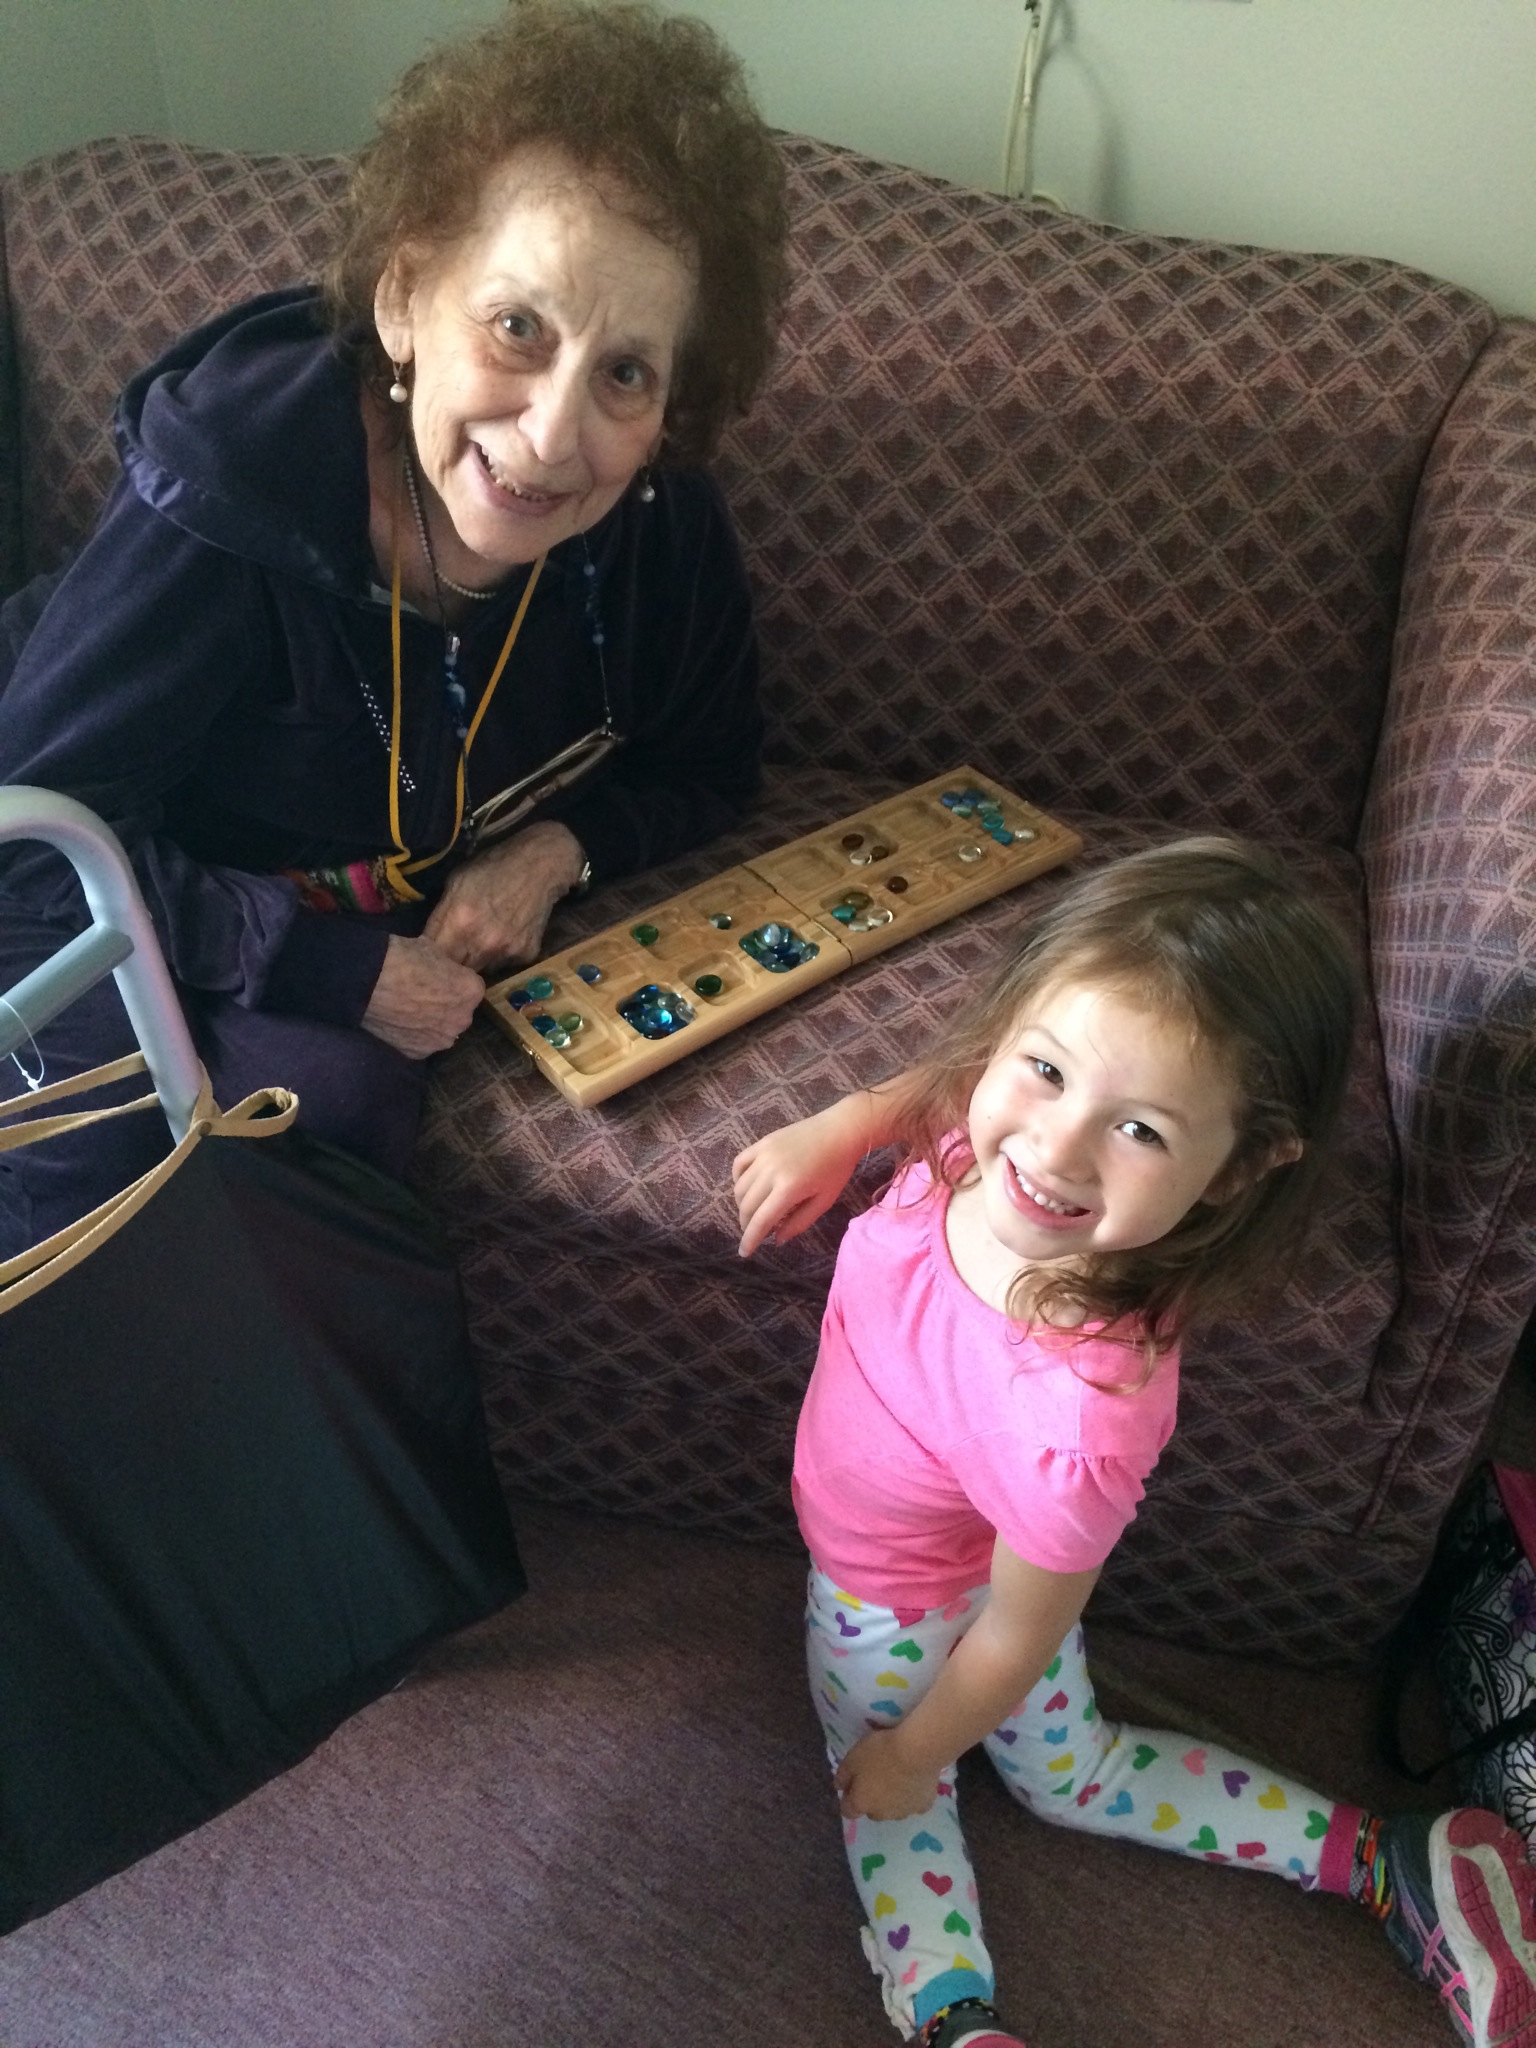 GG Bea was a quick study and soon was giving Maile a run for her money on Mancala